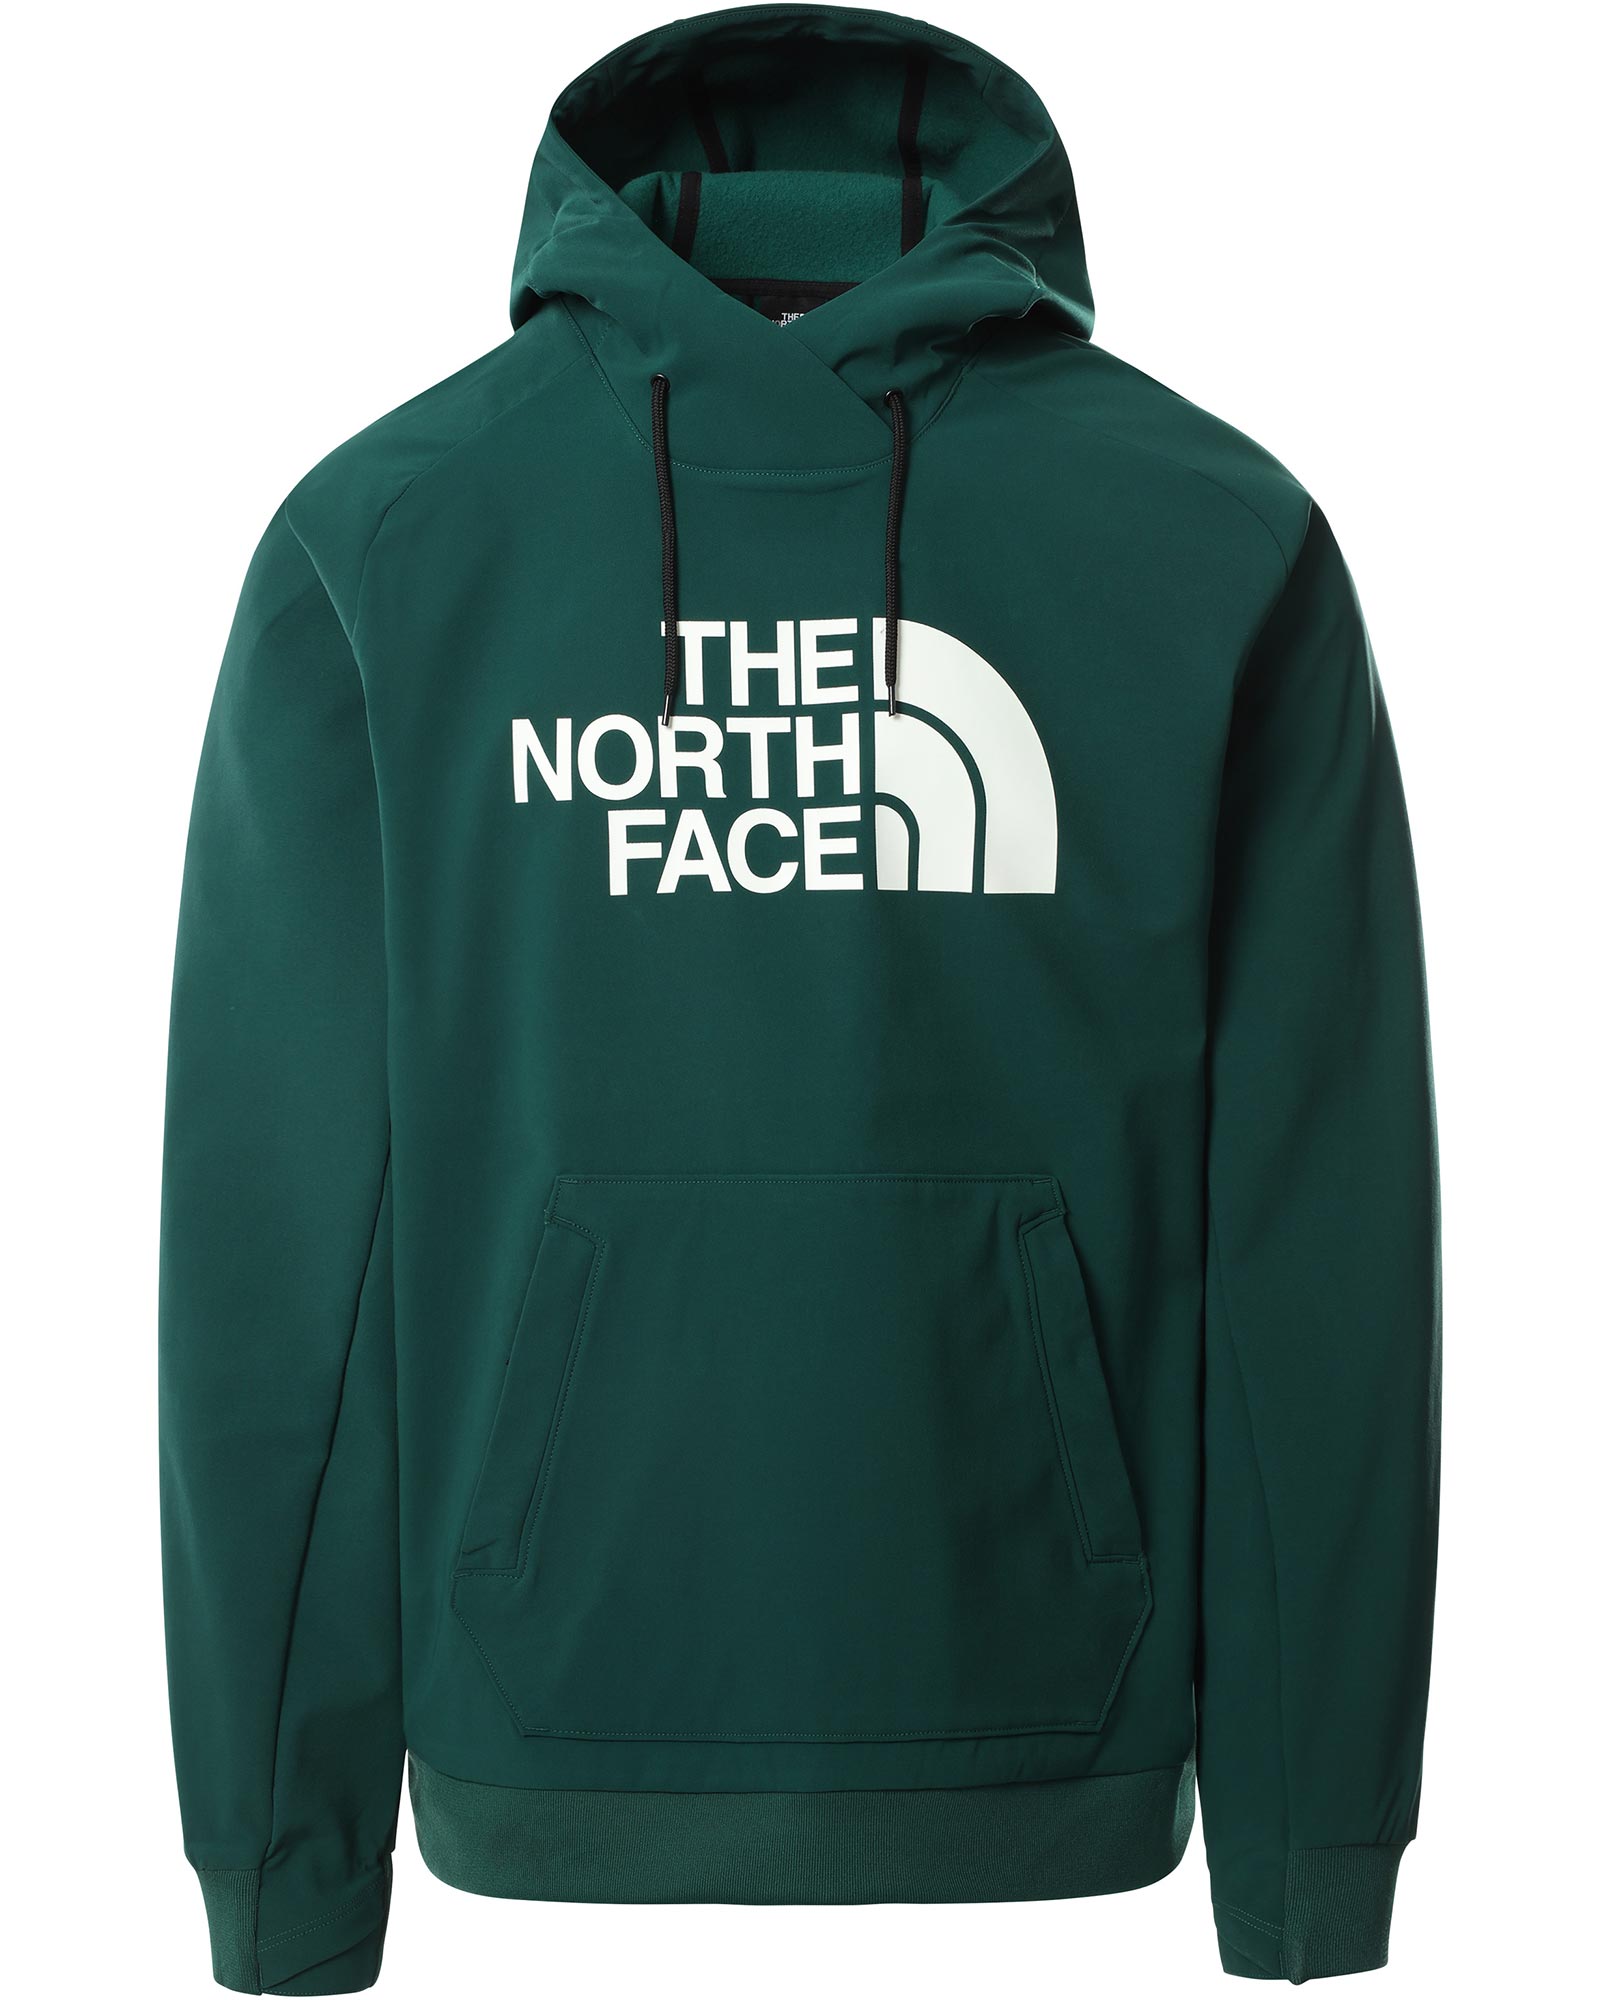 The North Face Teckno Logo Mens Hoodie